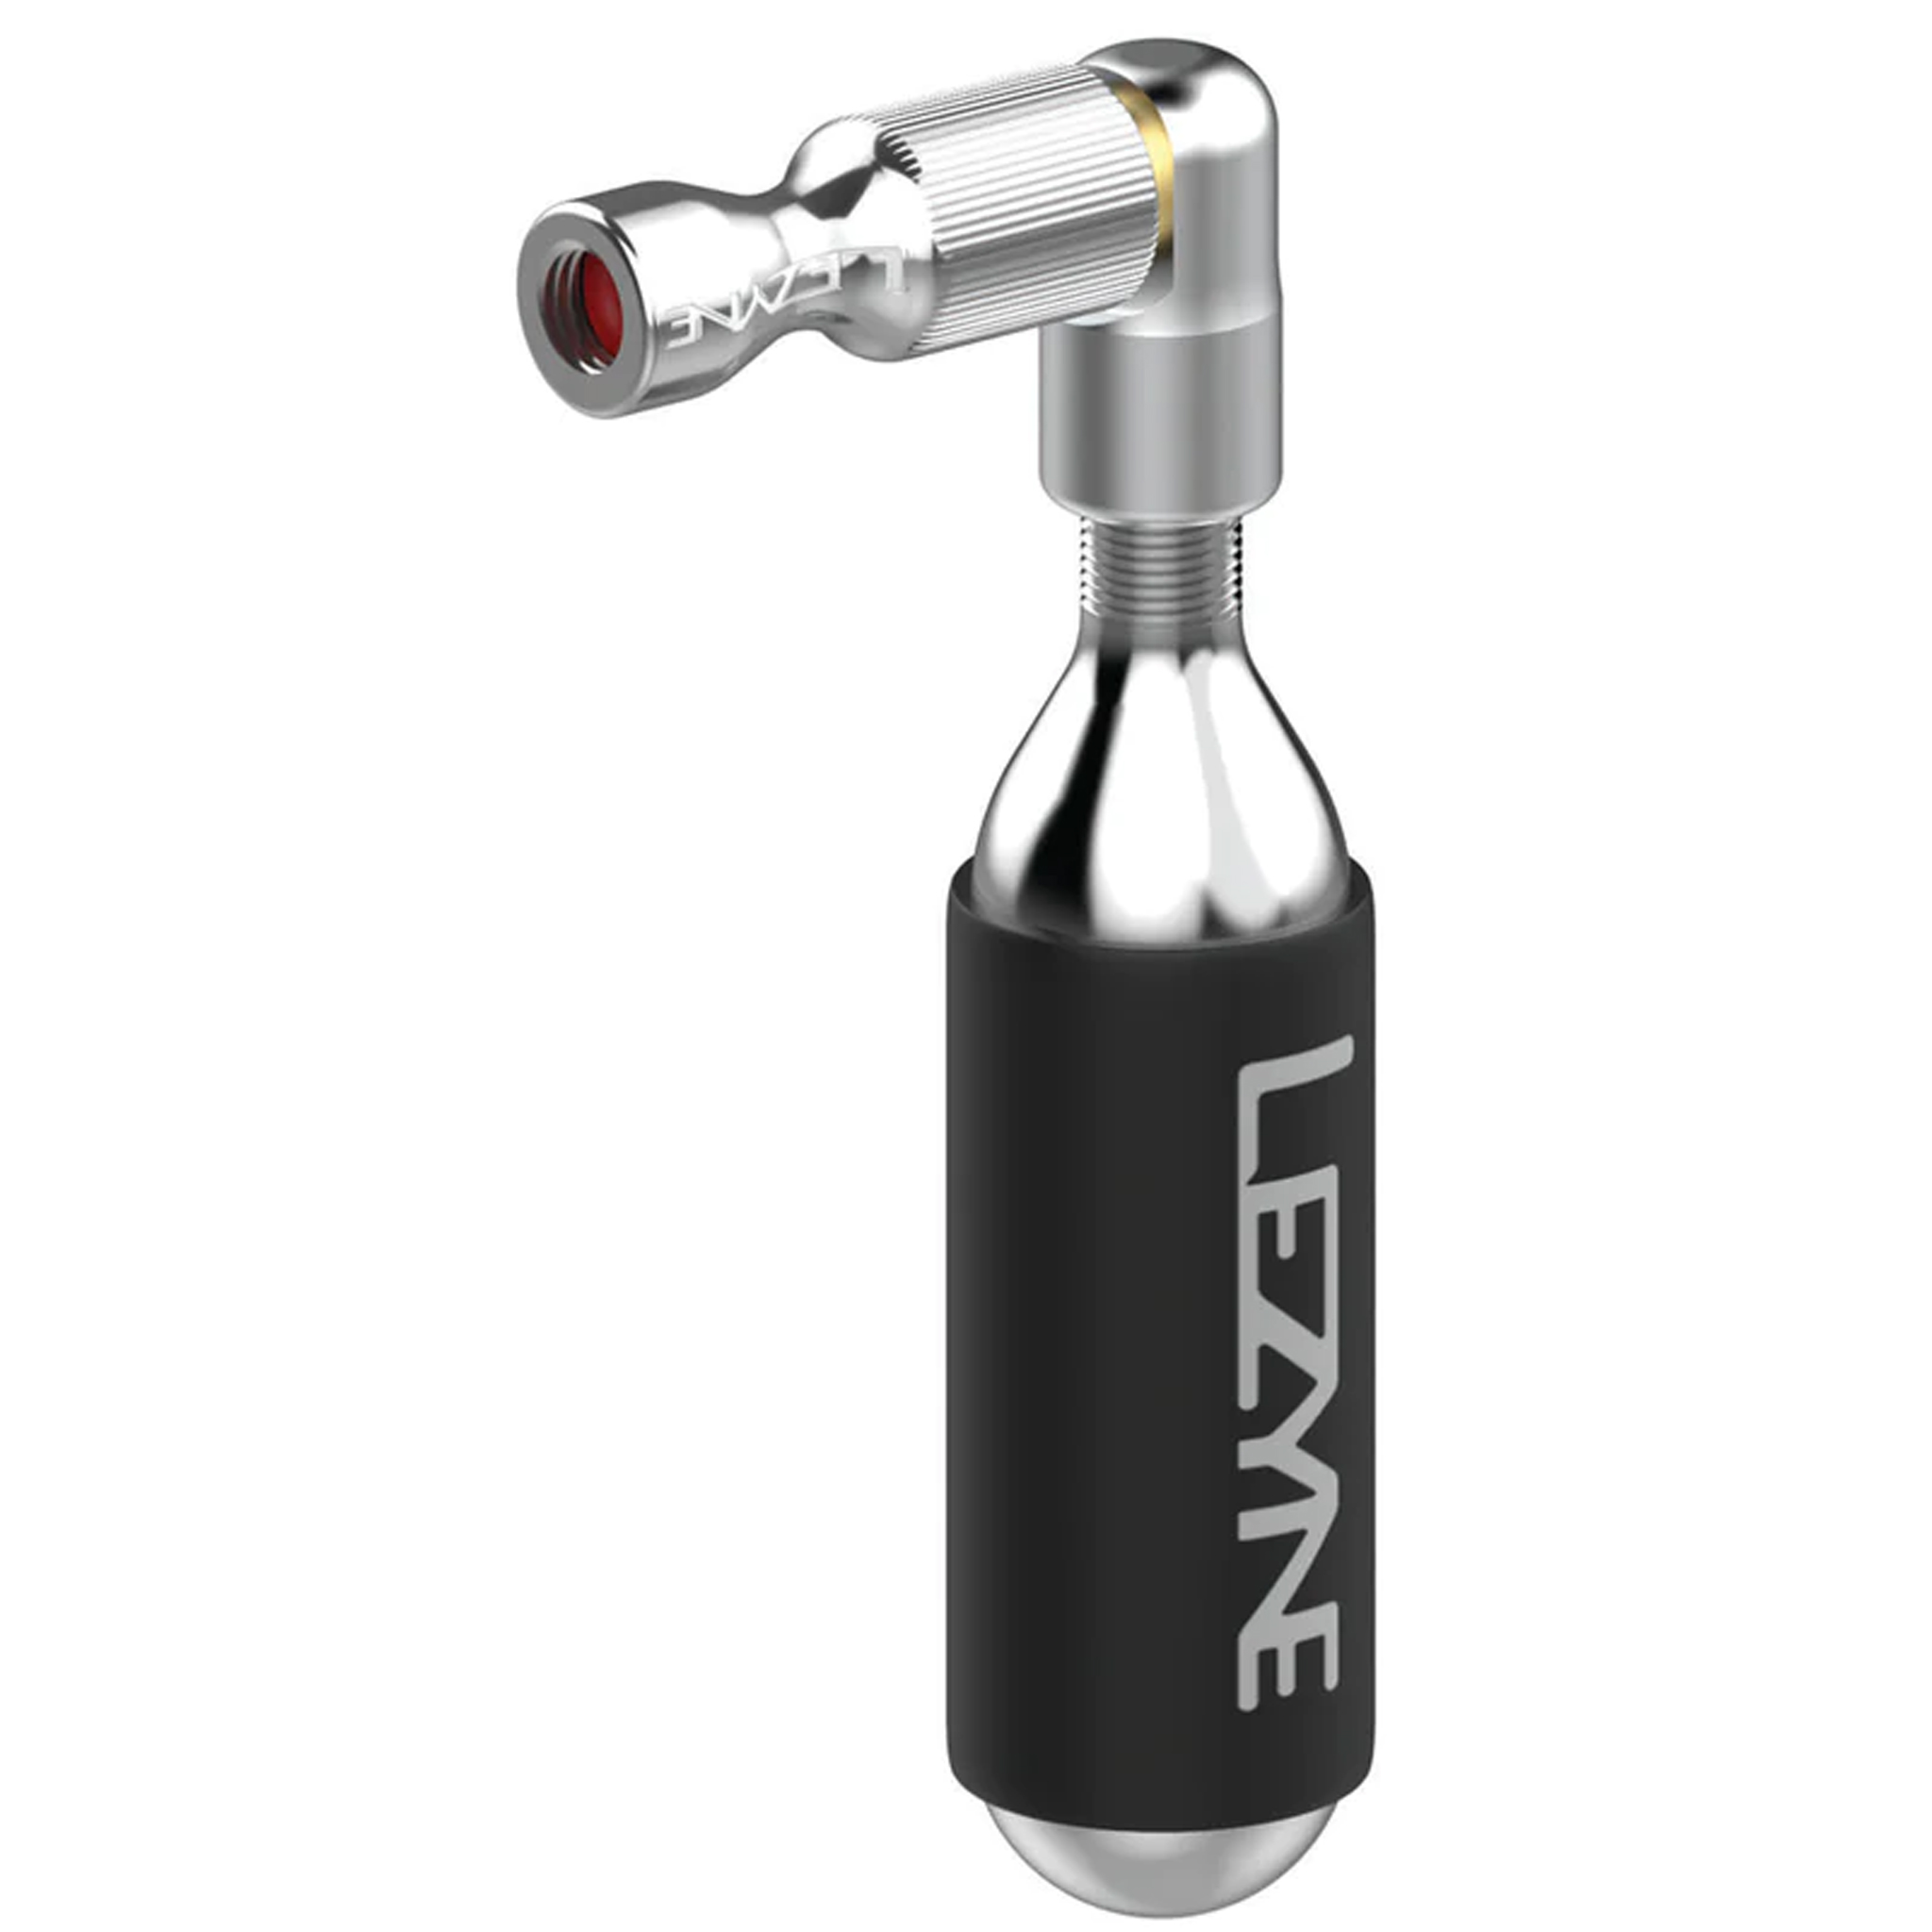 Lezyne Trigger Drive CO2 Inflator, Silver